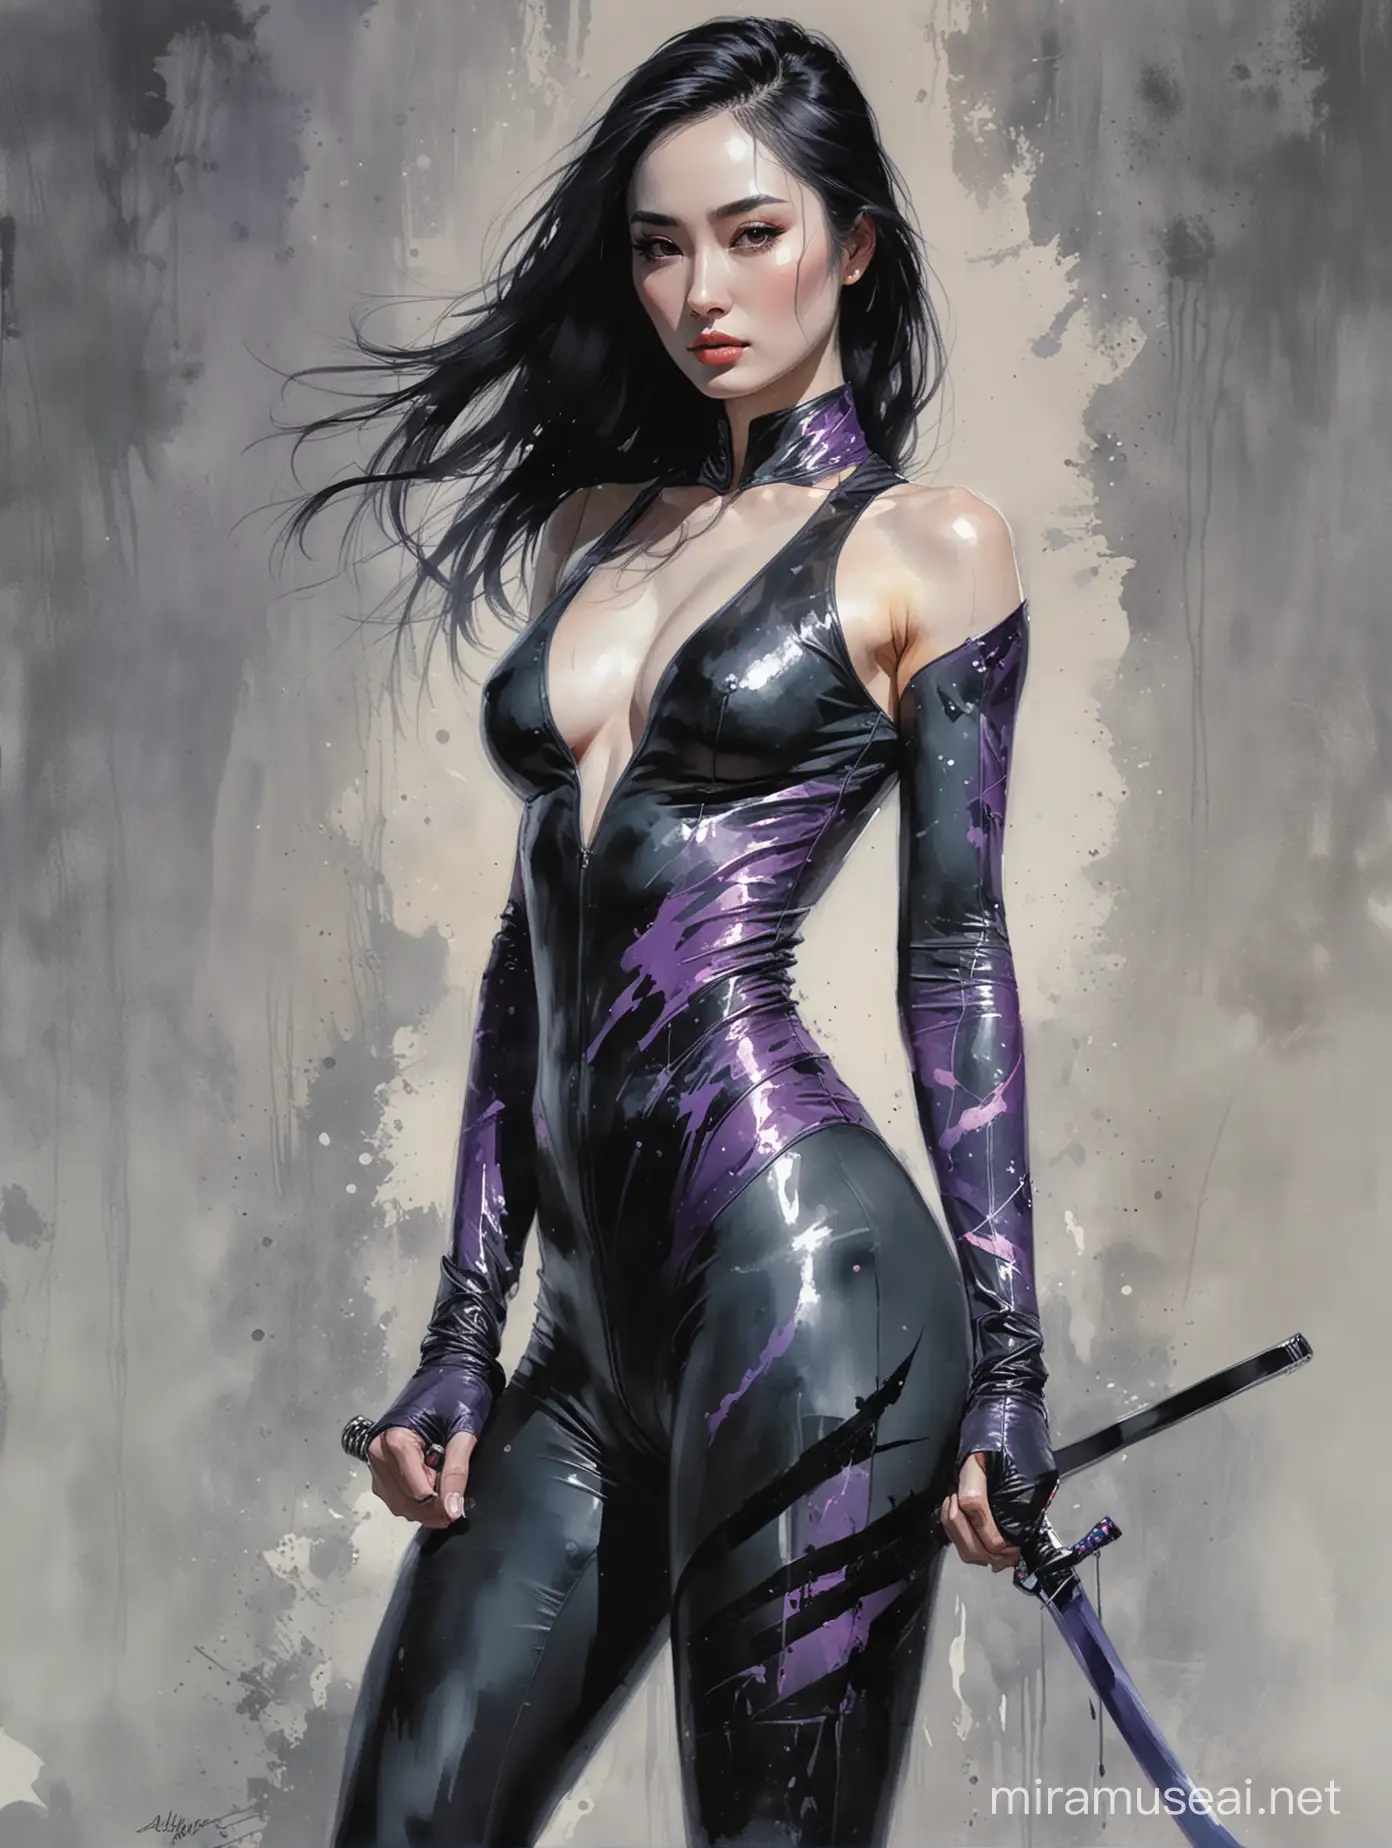 Yang Mi in HighNeck Catsuit Wielding Katana with Purple Electricity